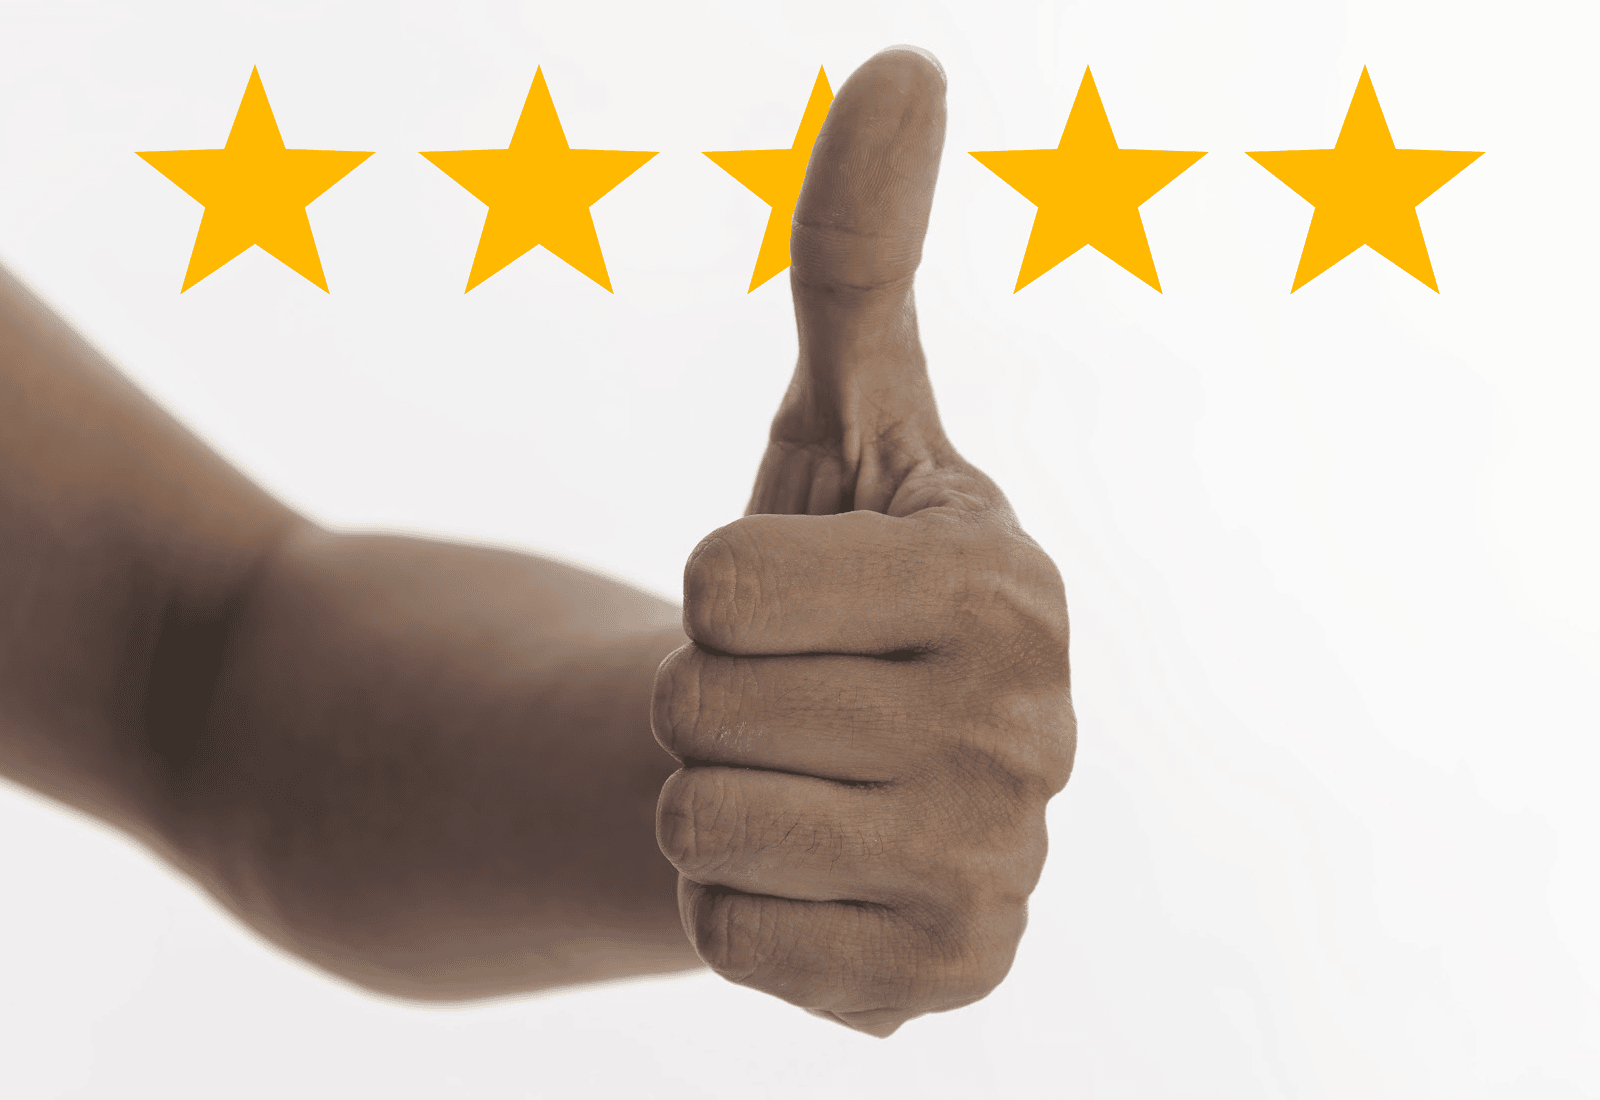 thumbs up in front of 5 stars